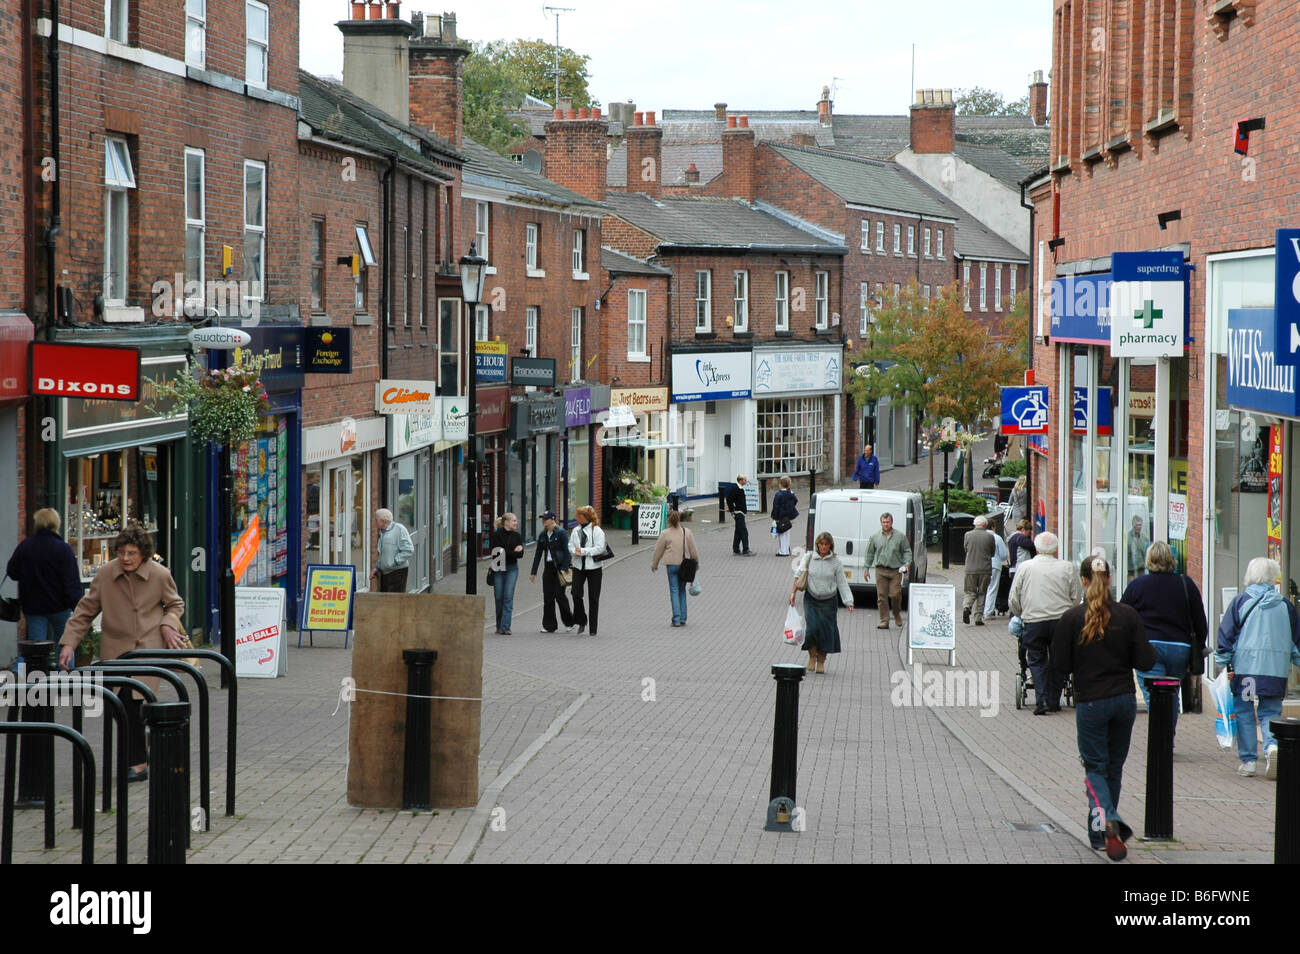 Typical small English town street scene. A pedestrianised street with shops and pedestrians in Congleton, Cheshire, England. Stock Photo